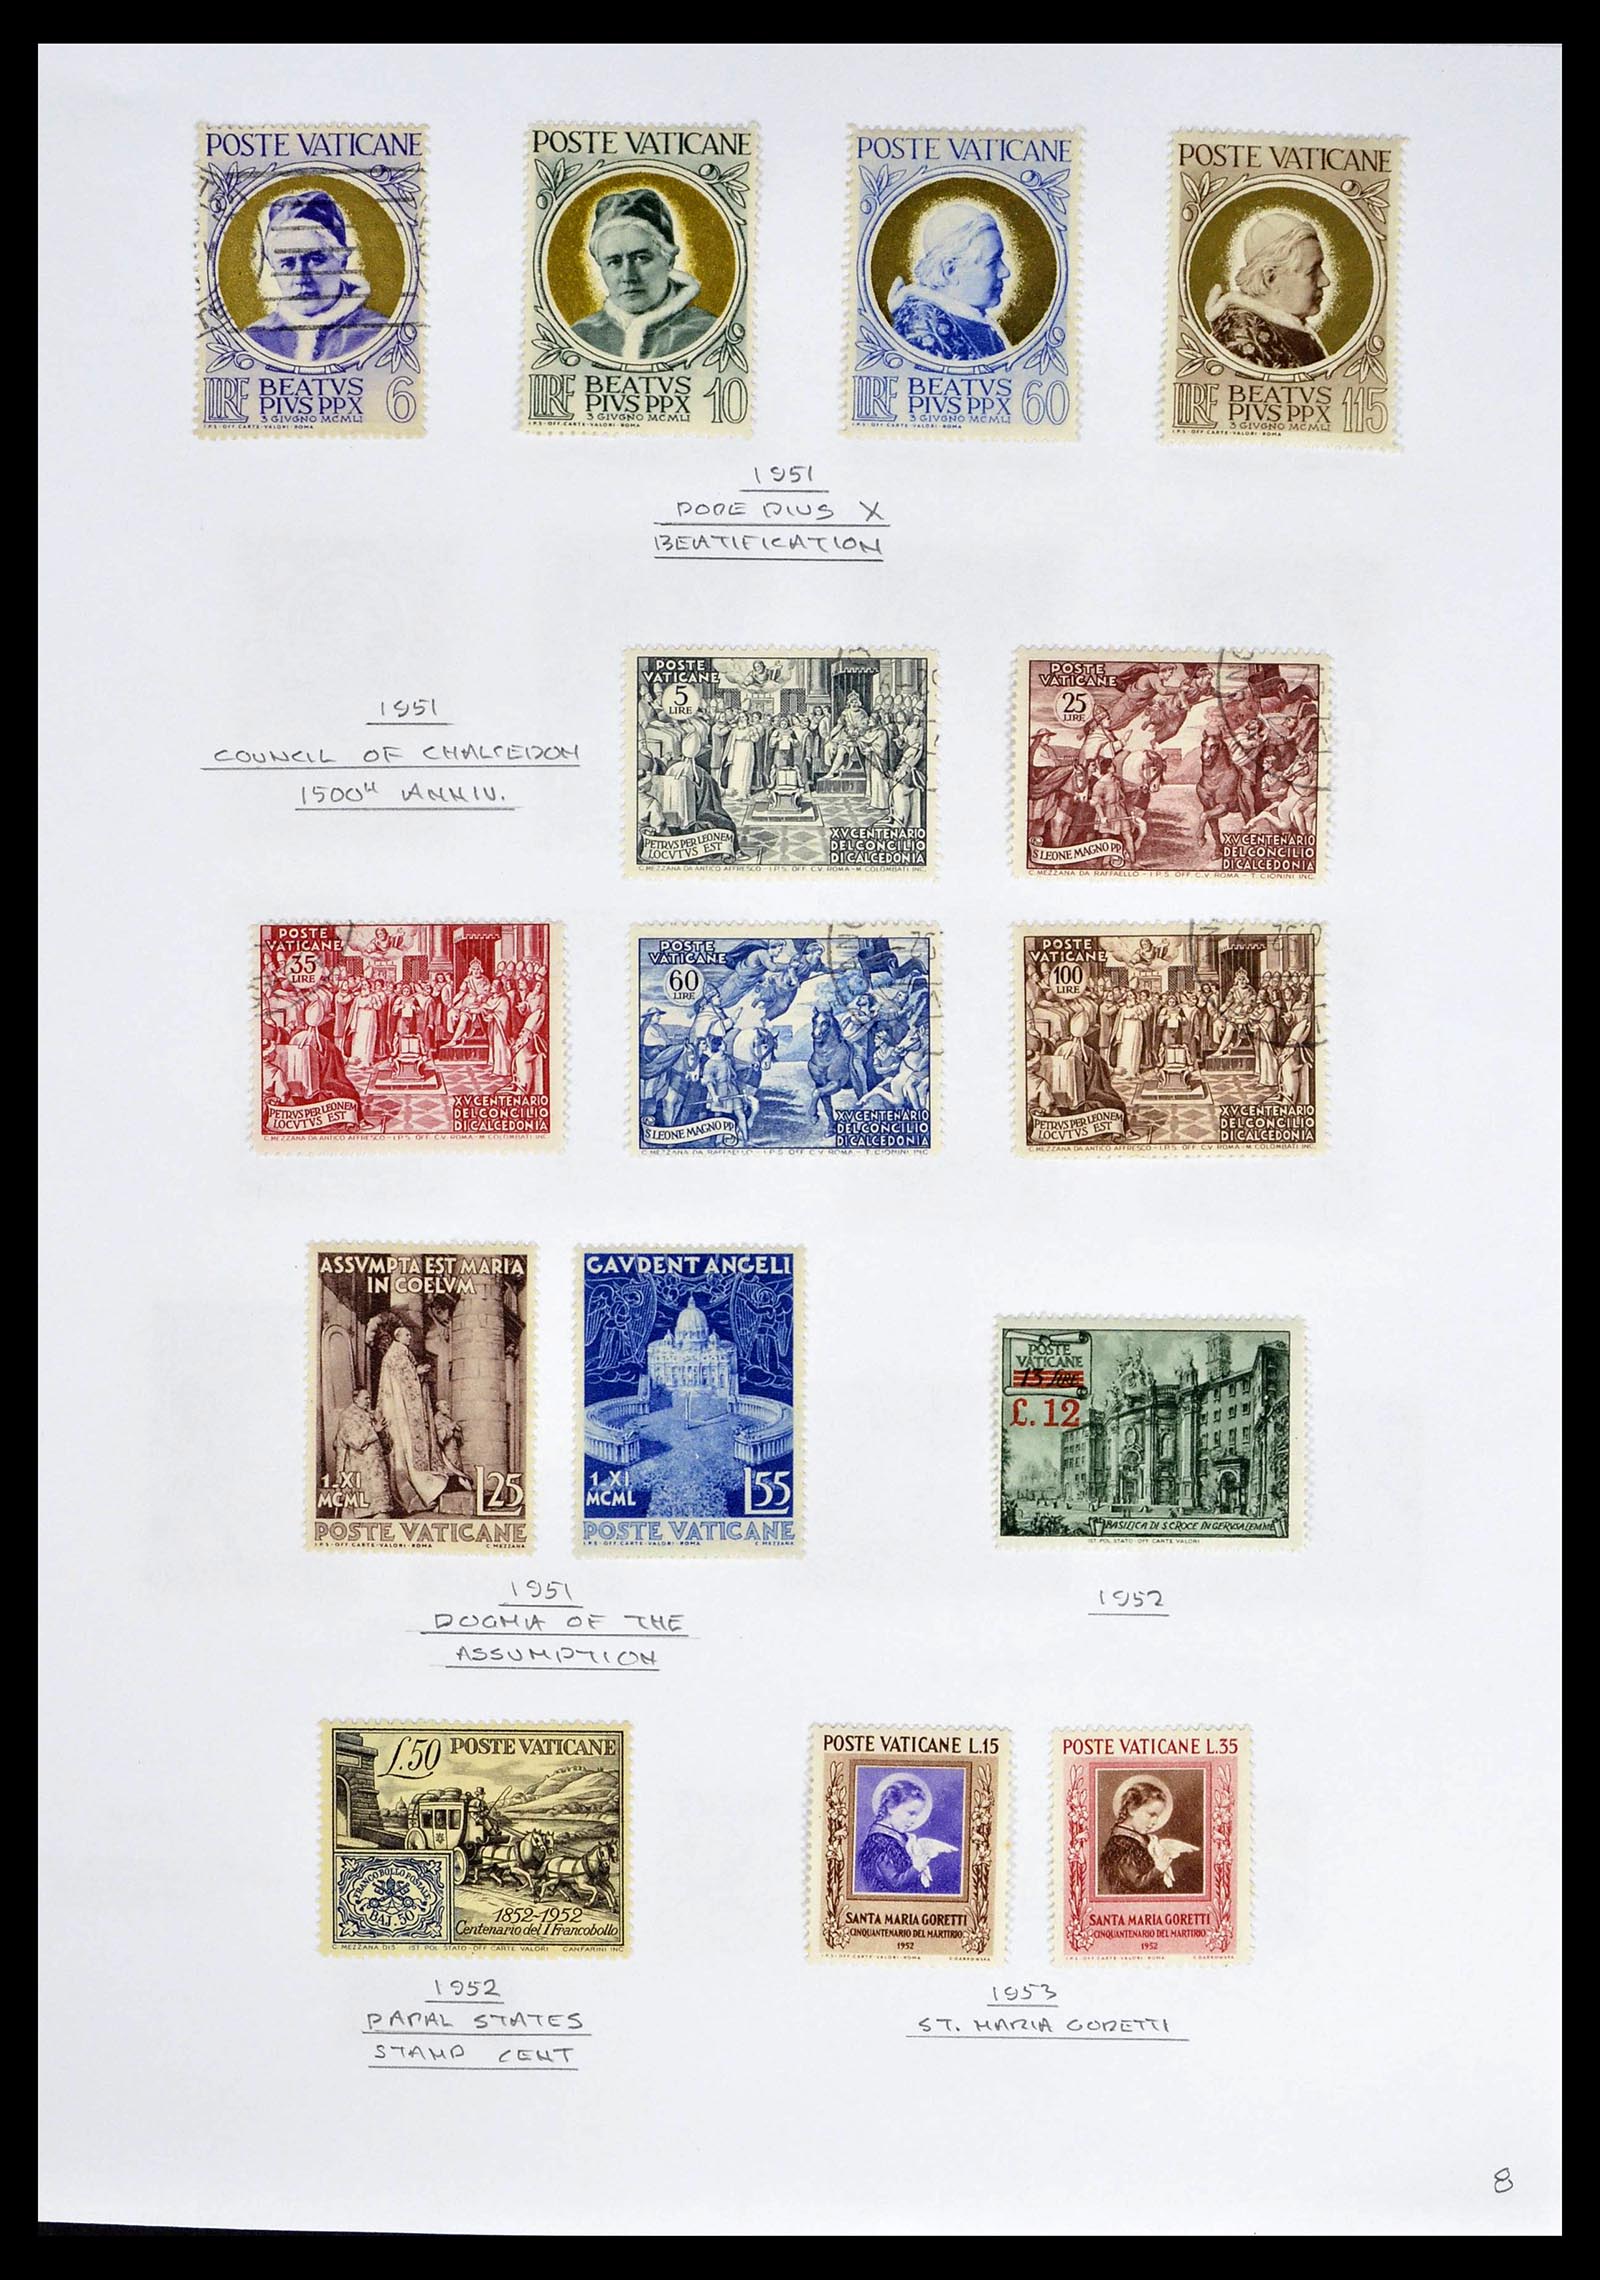 39099 0010 - Stamp collection 39099 Vatican 1852-2008.